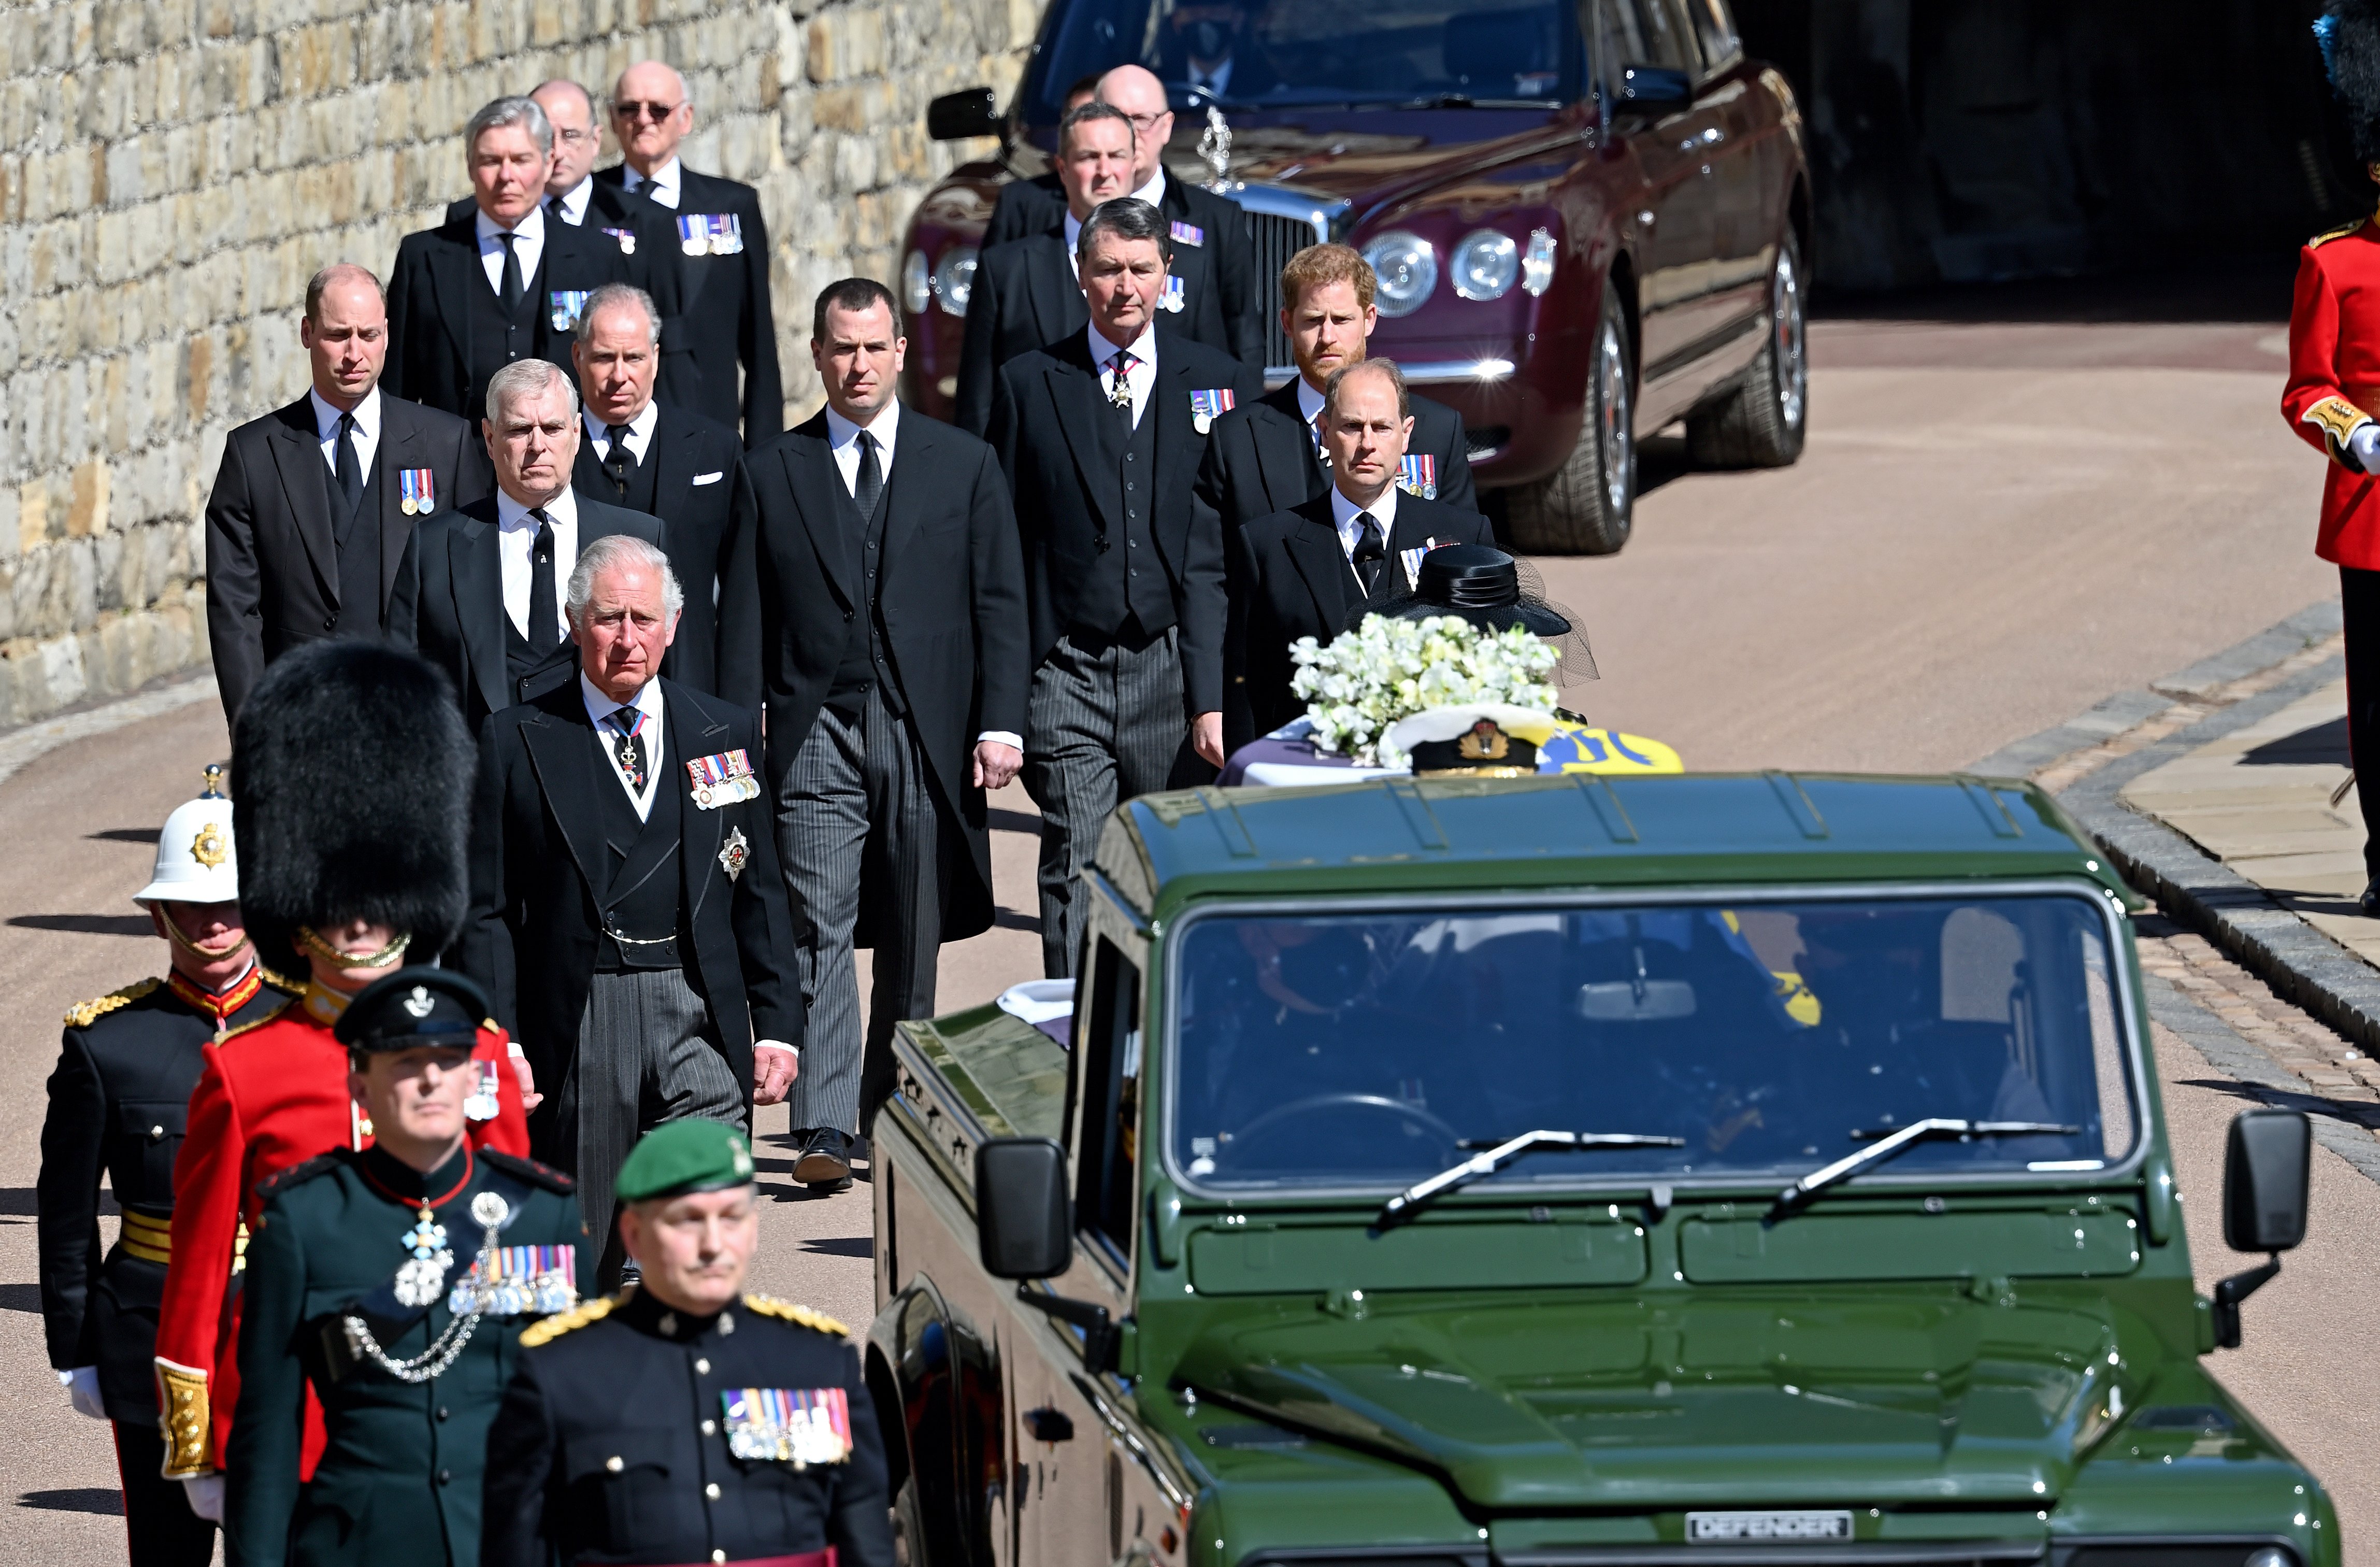 Prince Charles, Prince of Wales, Prince Andrew, Duke of York, Prince Edward, Earl of Wessex, Prince William, Duke of Cambridge, Peter Phillips, Prince Harry, Duke of Sussex, David Armstrong-Jones, 2nd Earl of Snowdon and Vice Admiral Sir Timothy Laurence follow Prince Philip, Duke of Edinburgh's coffin (draped in his Royal Standard Flag and bearing his Royal Navy cap, sword and a bouquet of lilies, white roses, freesia and sweet peas) as it is carried on a specially designed Land Rover Defender hearse during his funeral procession to St. George's Chapel, Windsor Castle on April 17, 2021. | Source: Getty Images 